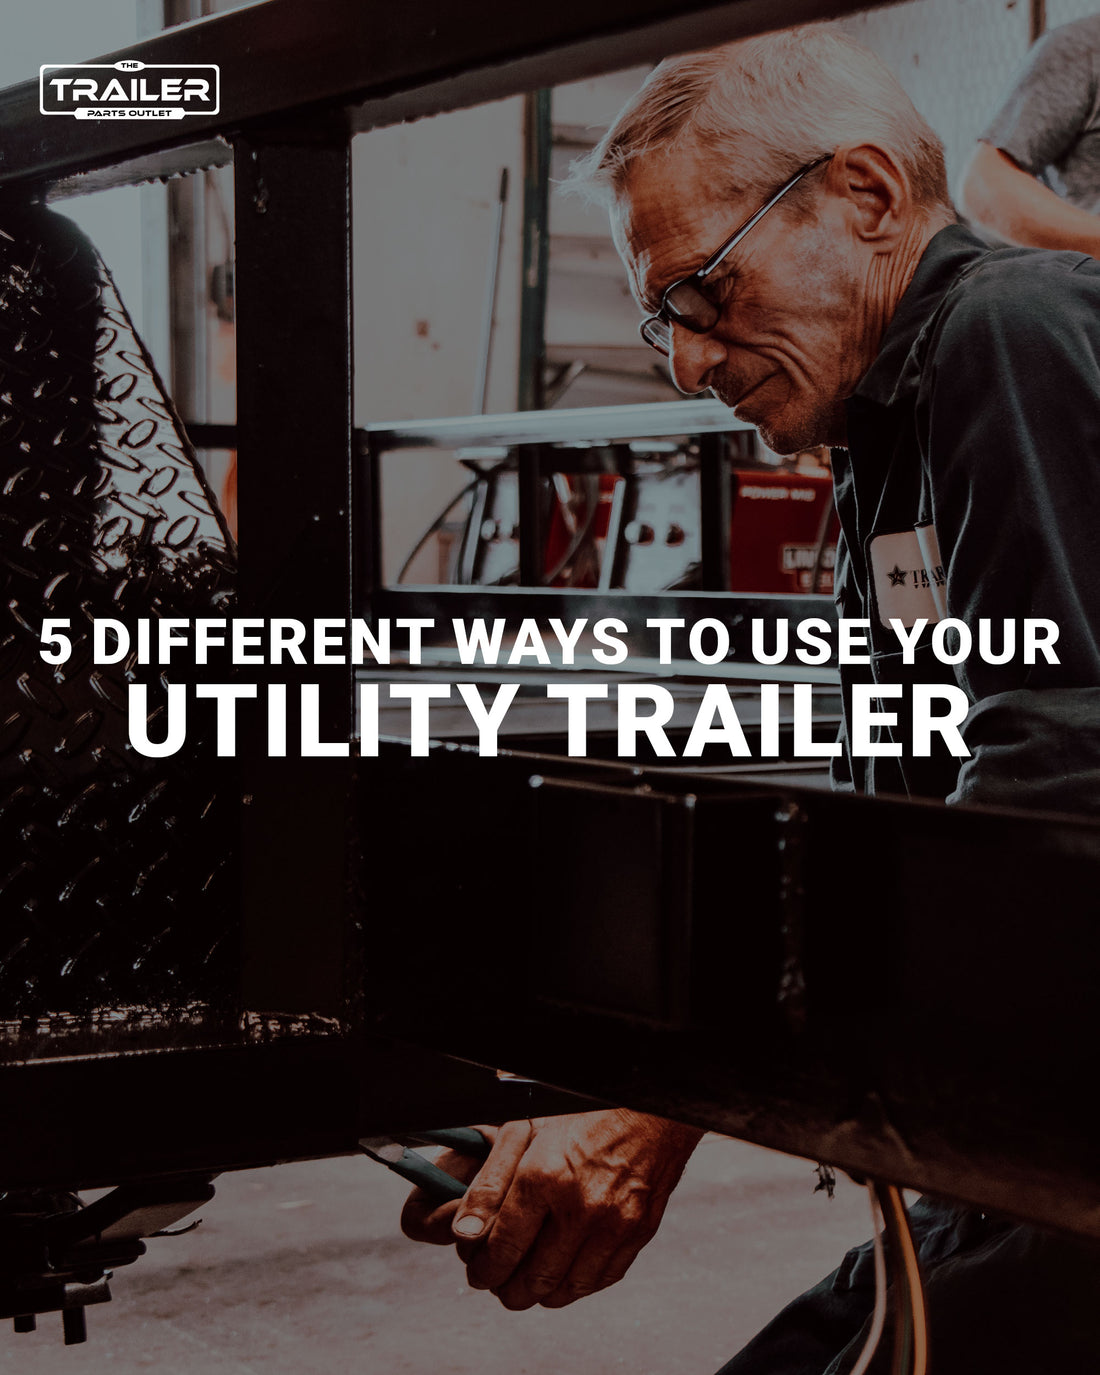 5 Different Ways to Use Your Utility Trailer